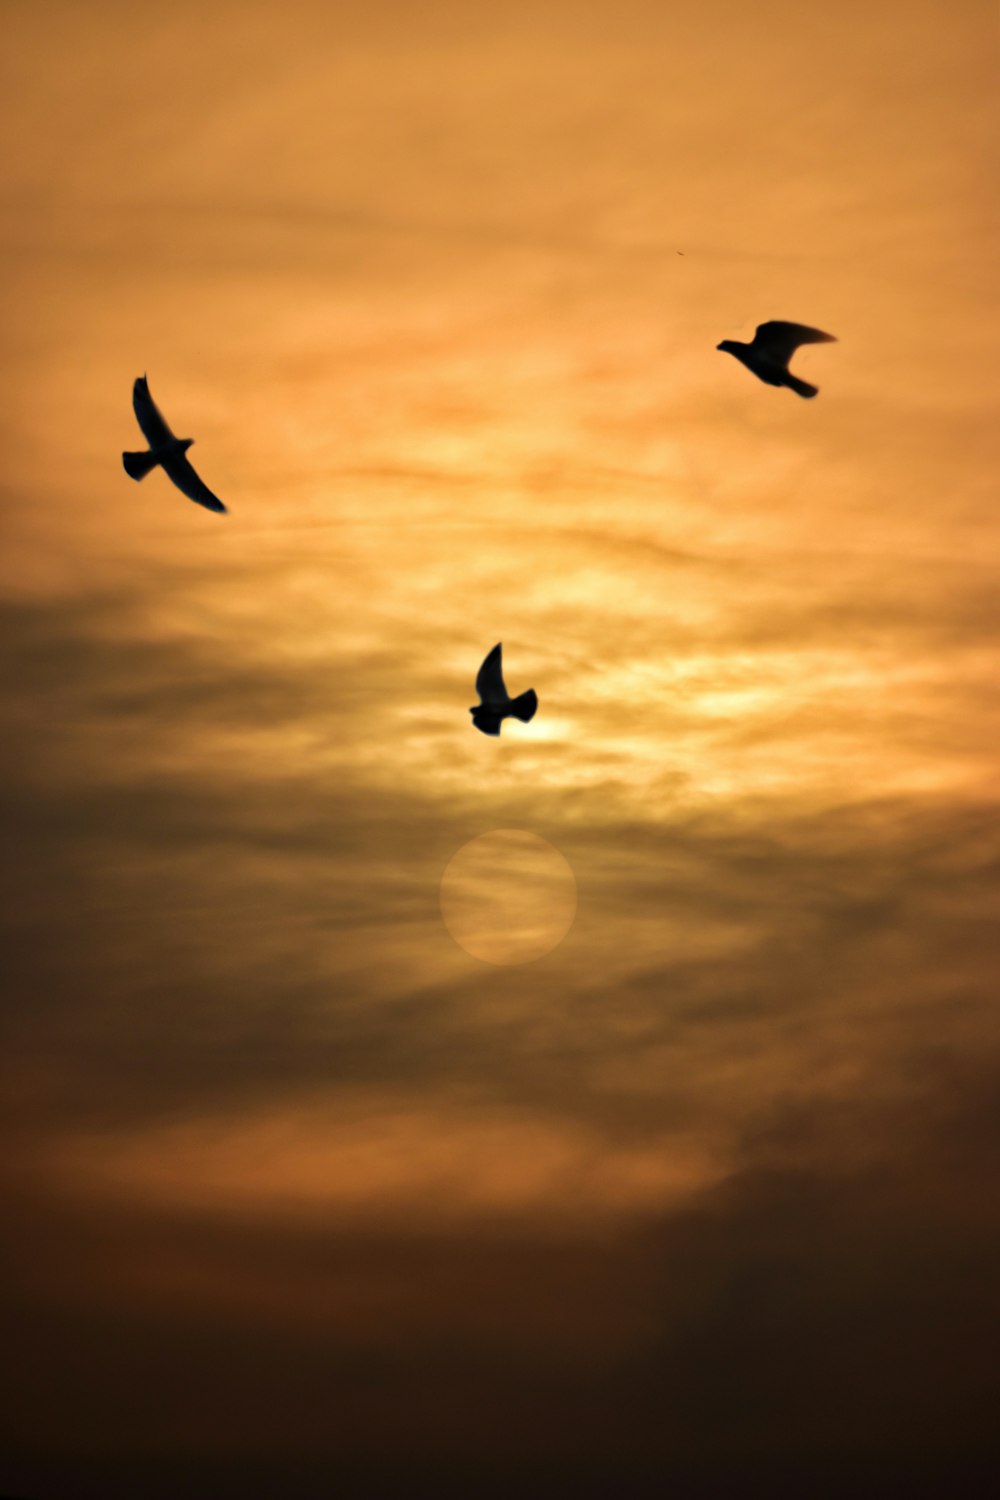 silhouette of birds flying during sunset